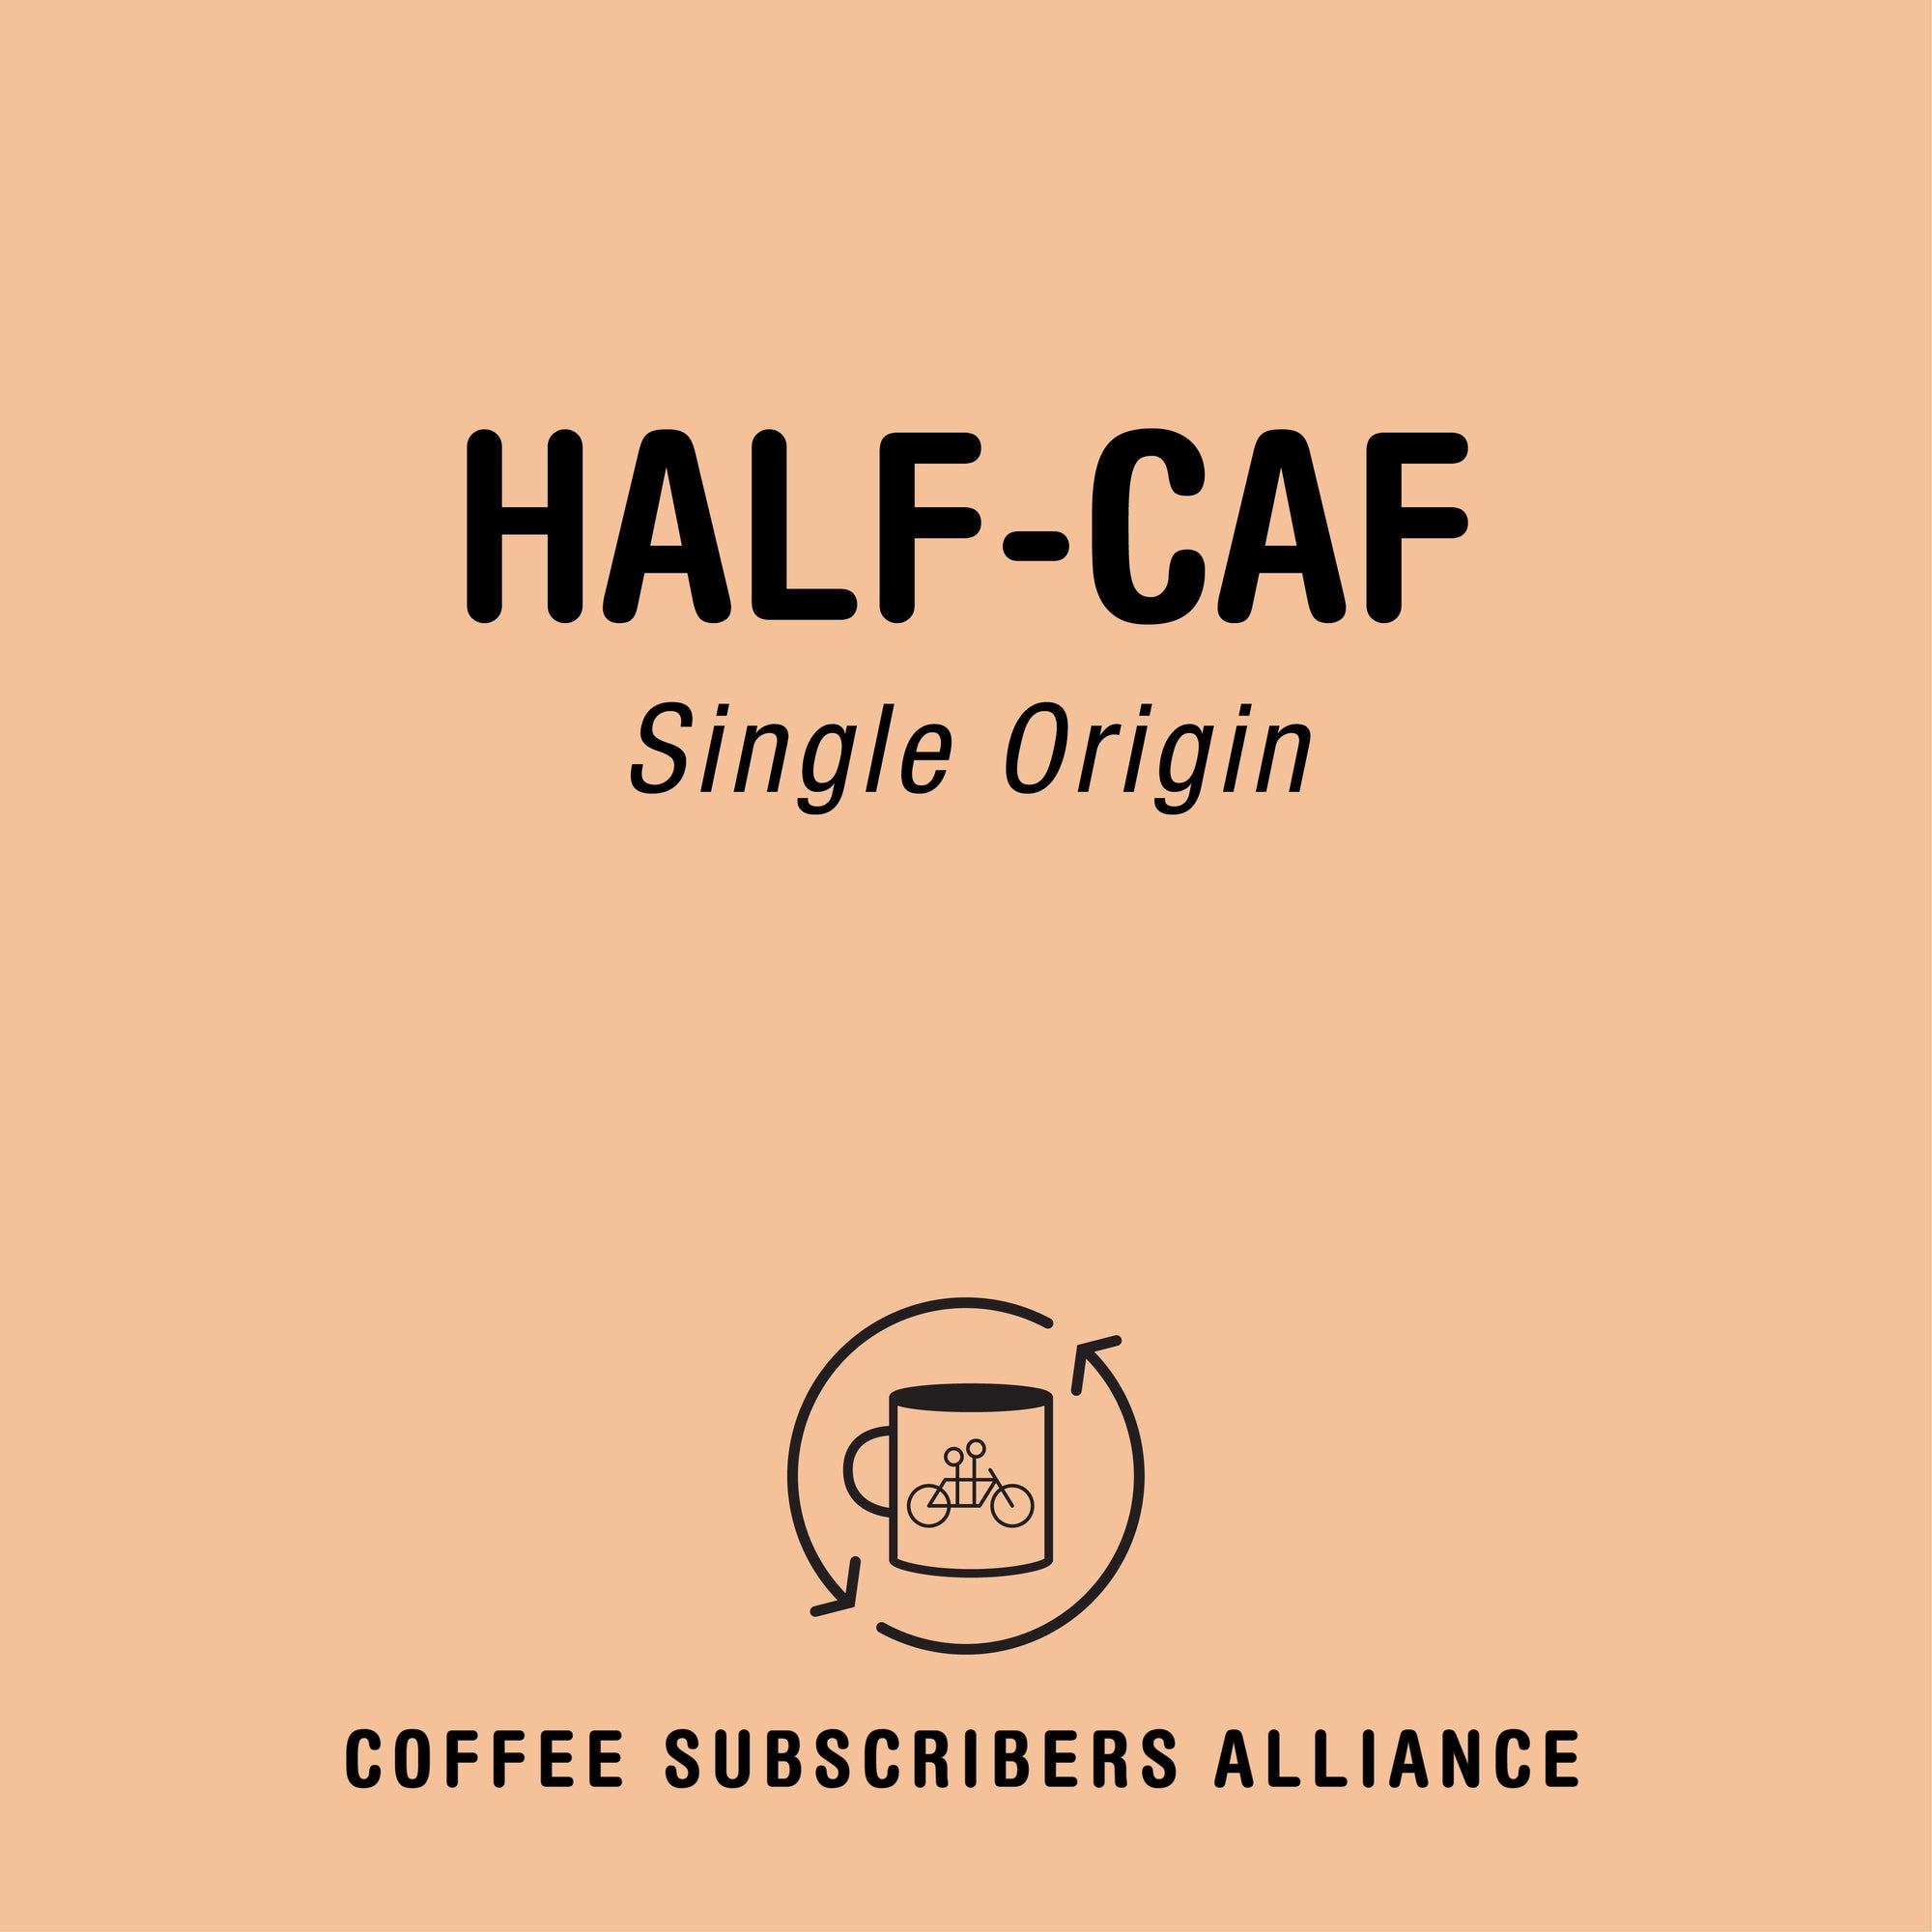 Logo of the Tandem Half-Caf Subscription Gift 1 Week x 6 featuring the text "single origin" in bold black fonts on a peach background with a circular emblem including a coffee cup.